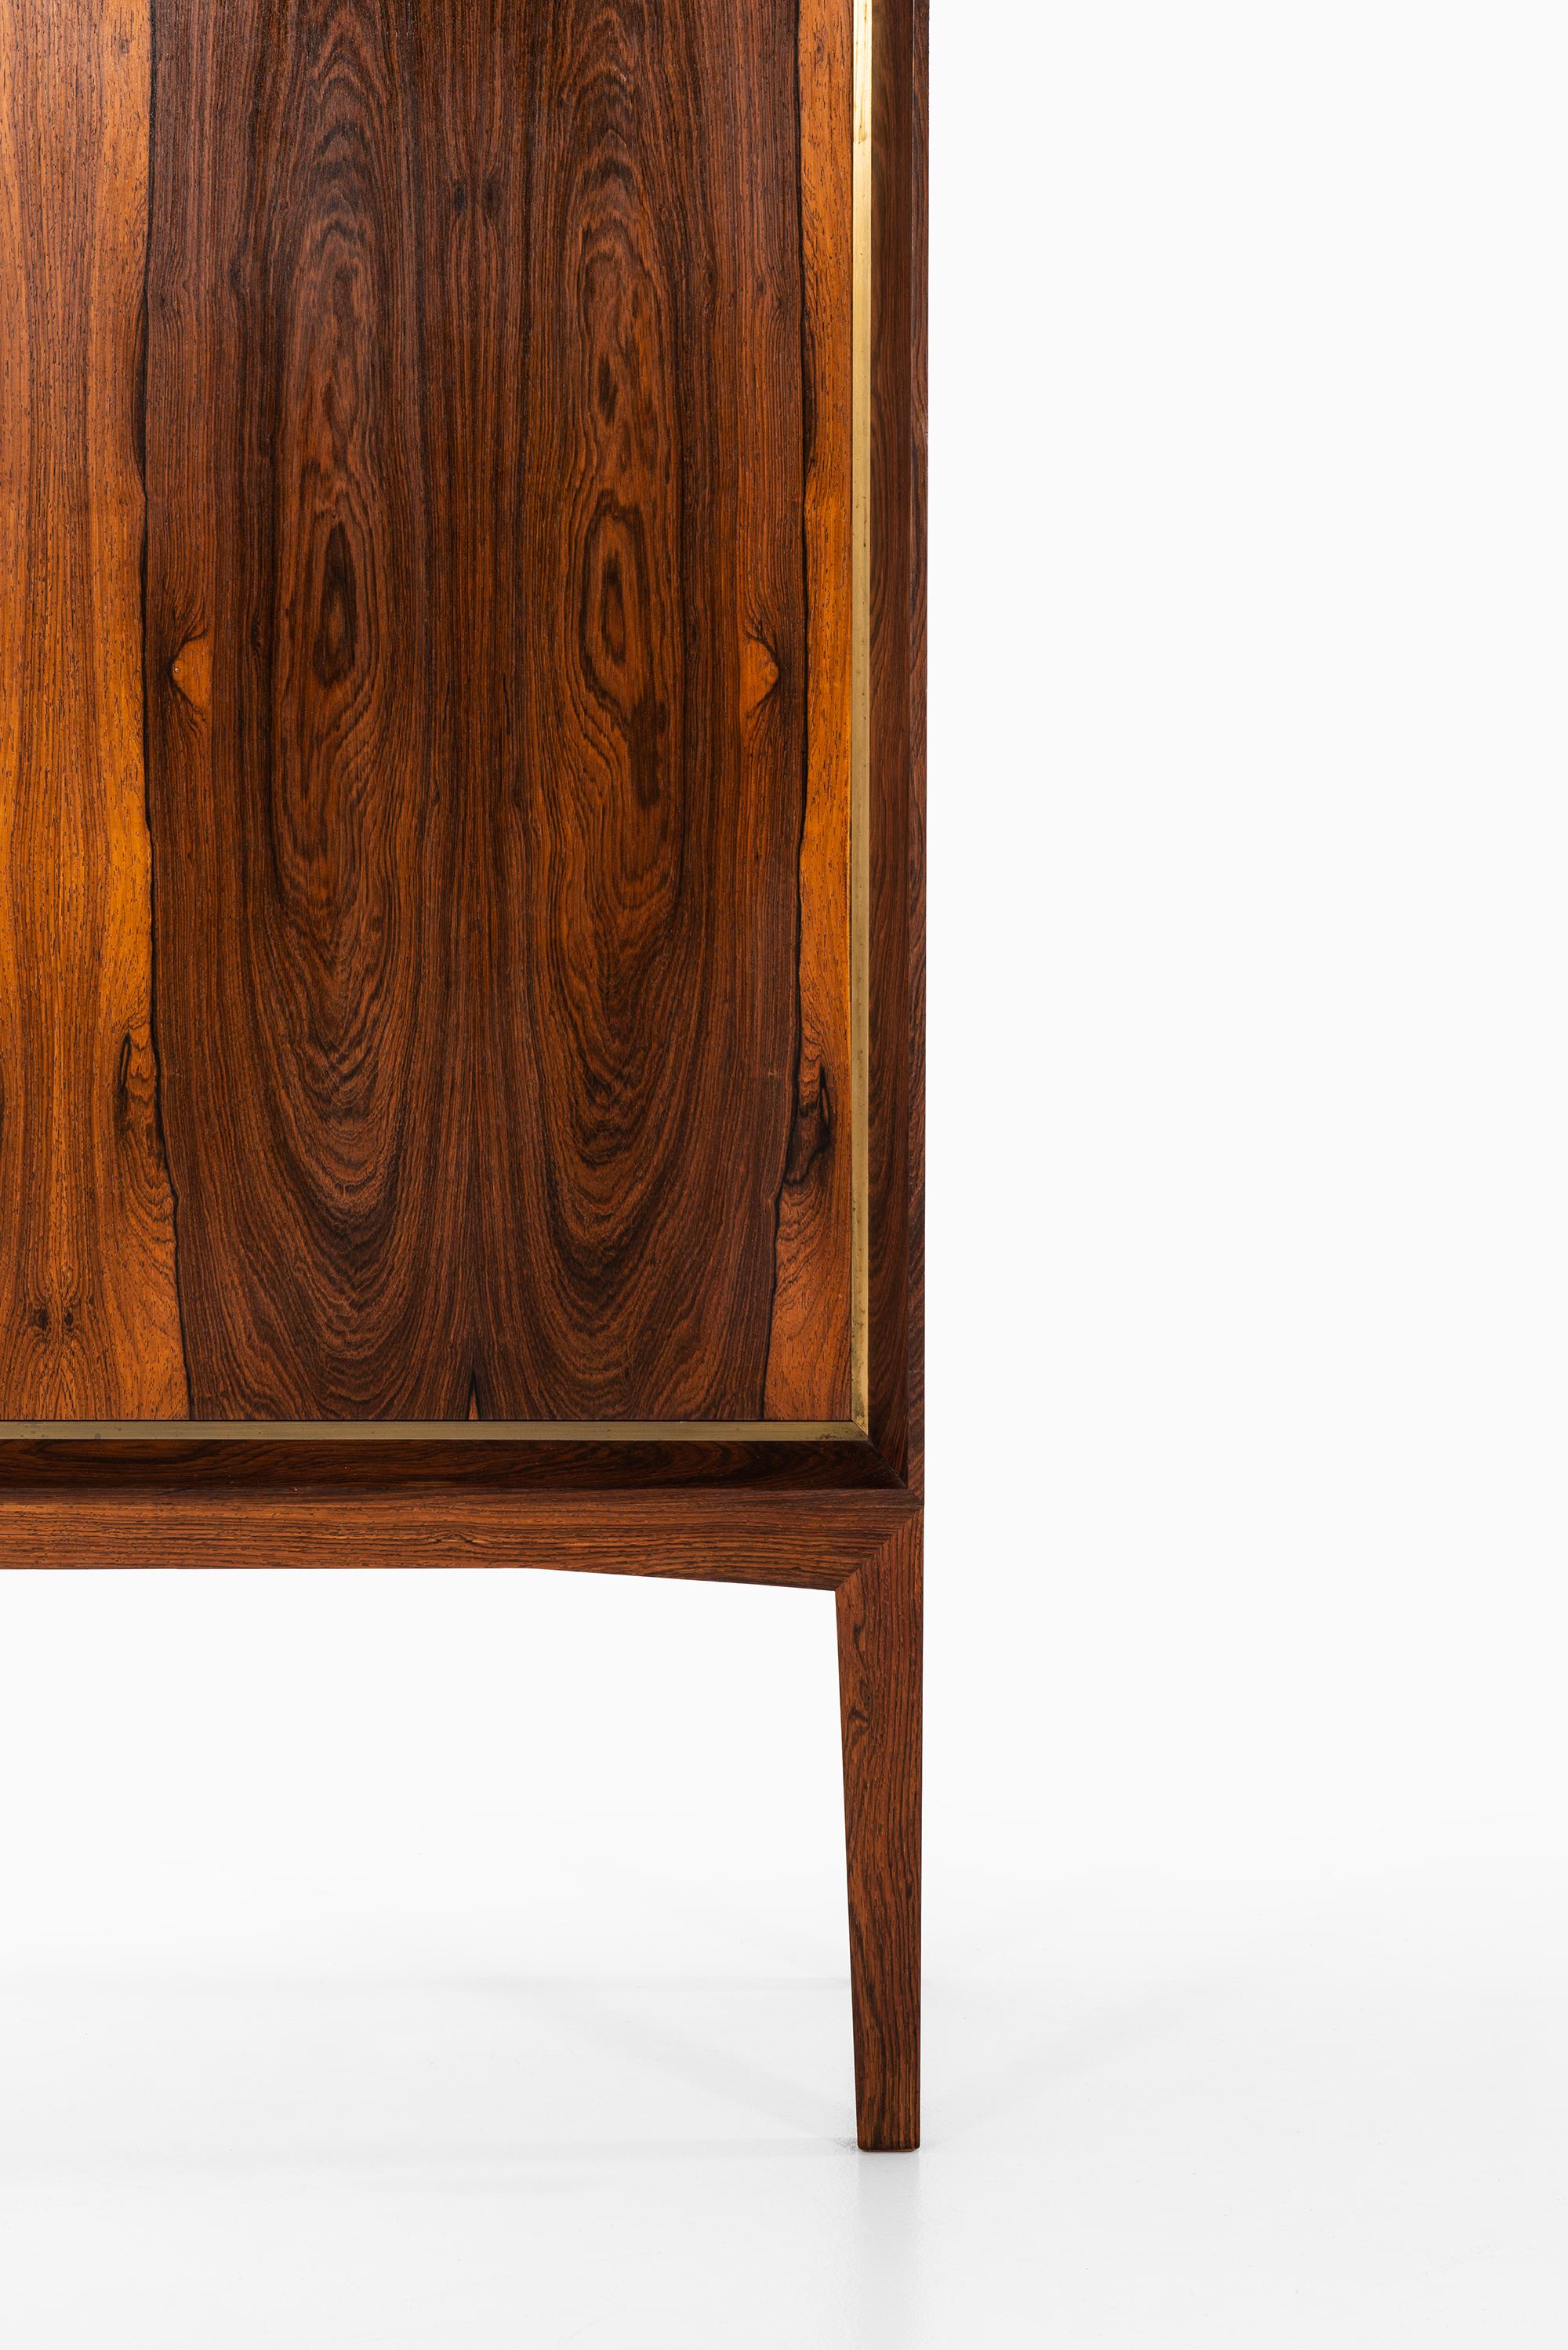 Very rare cabinet designed by Mogens Lysell. Produced by cabinetmaker Mogens Lysell in Denmark.